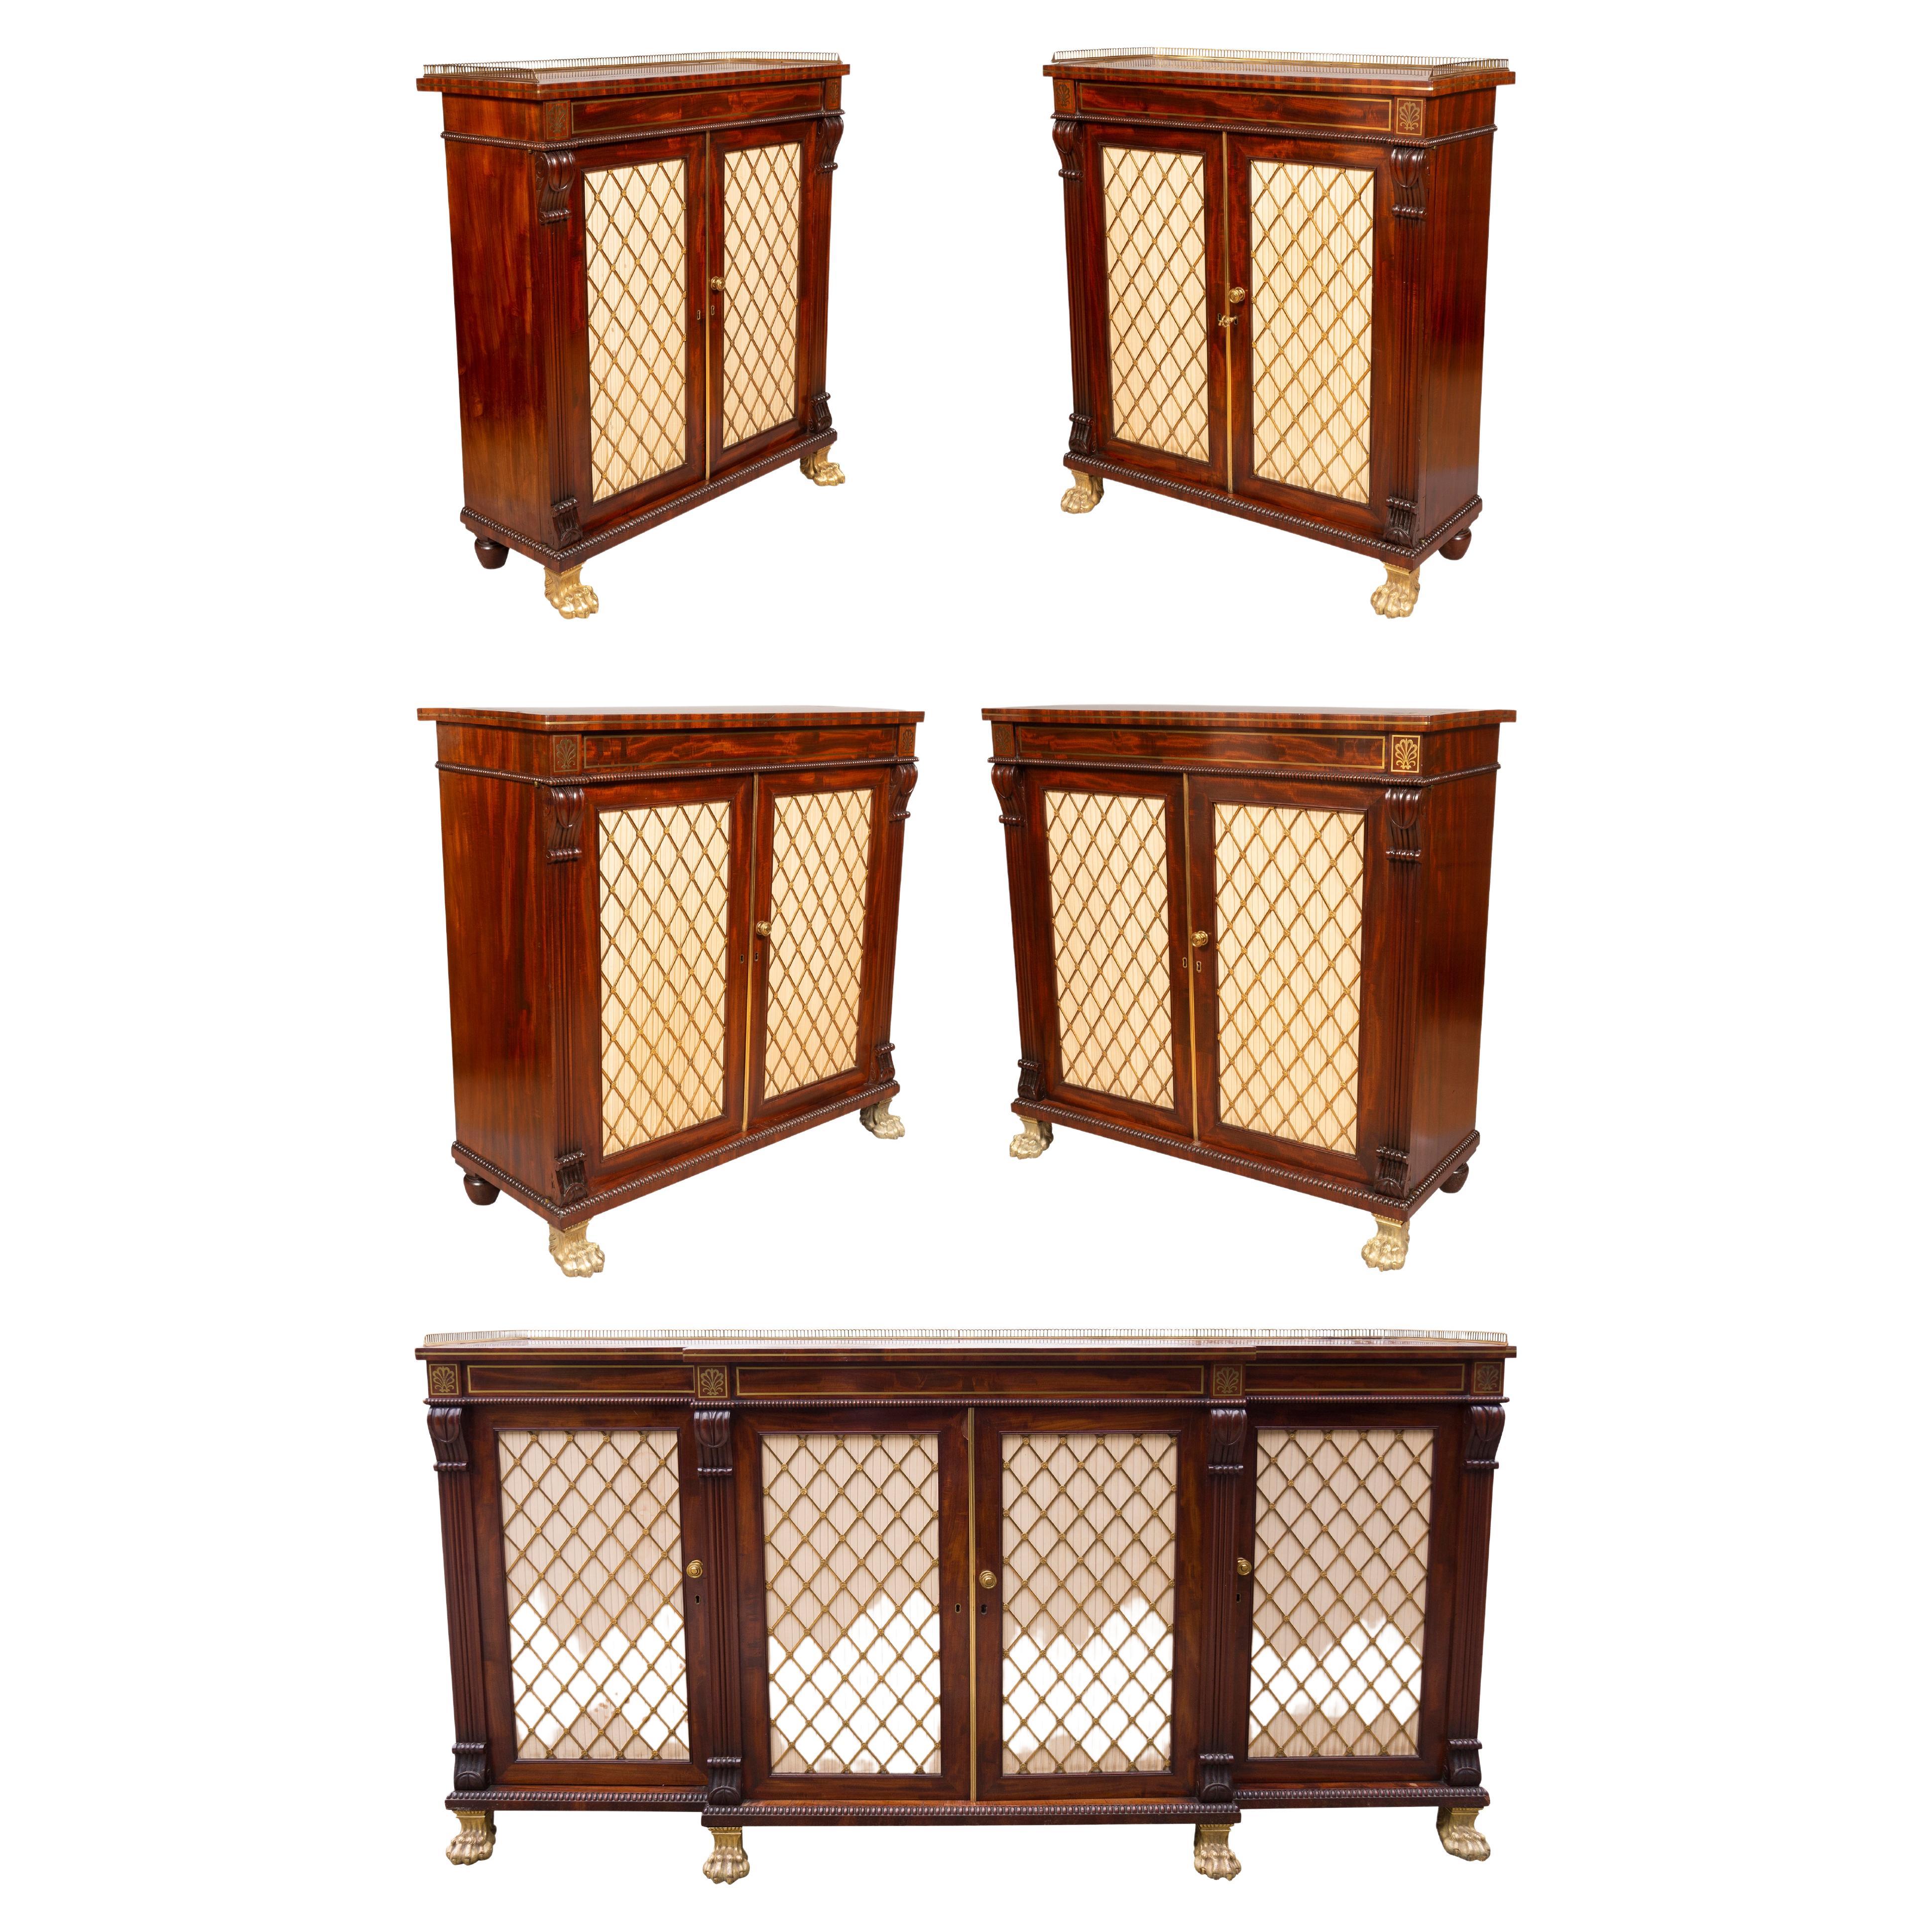 Suite Of Five Regency Brass Inlaid Side Cabinets From Westport House County Mayo For Sale